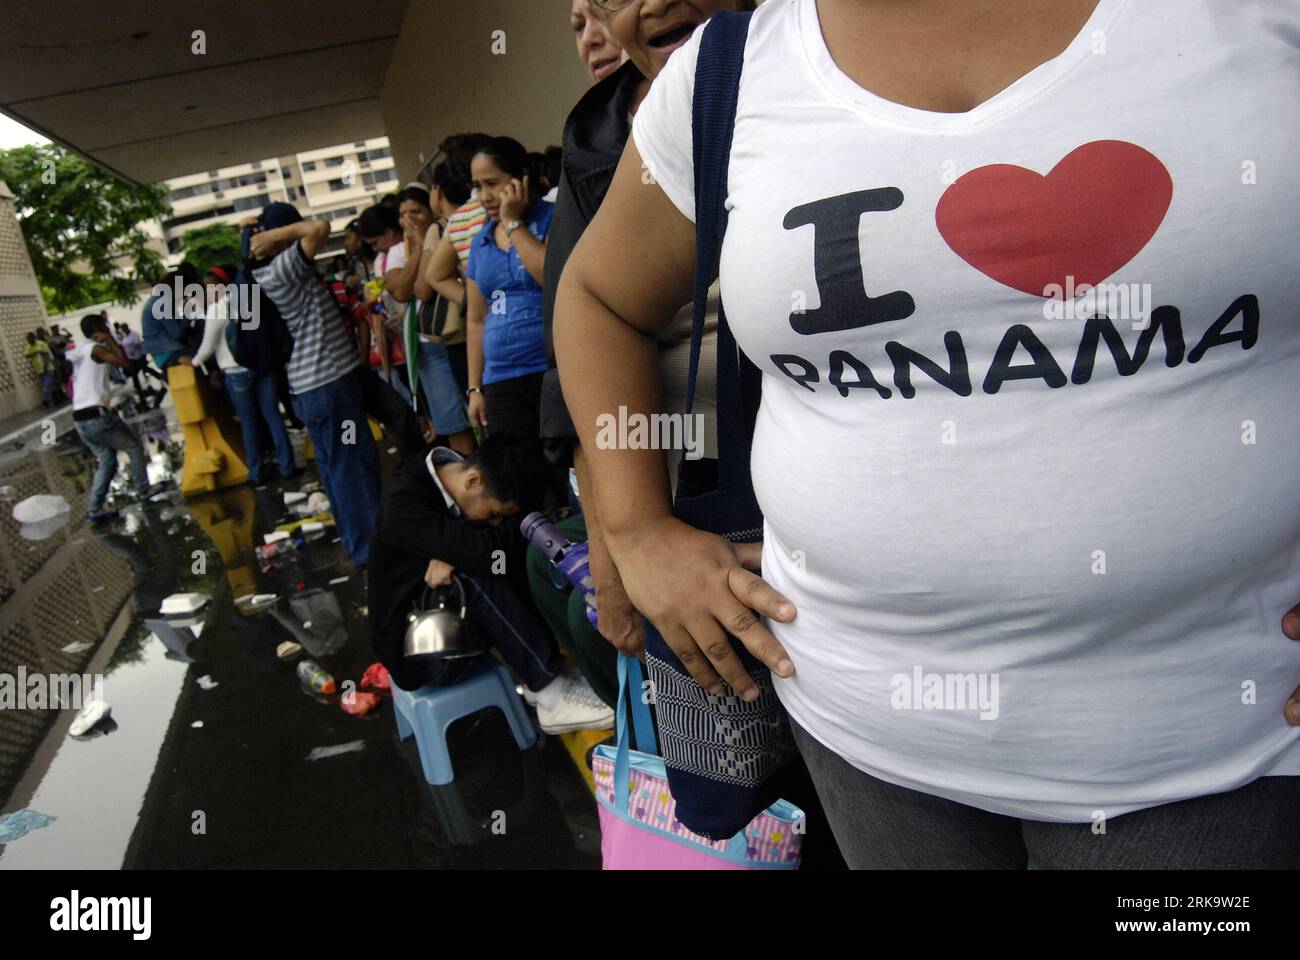 Bildnummer: 54233741  Datum: 17.07.2010  Copyright: imago/Xinhua (100717) -- PANAMA CITY, July 17, 2010 (Xinhua) -- Illegal immigrants wait to get legal ID at the Atlapa exhibition and convention center in Panama City, July 17, 2010. About 20,000 undocumented foreigners living in Panama will be granted legal right to stay, an official of National Service of Migration (SNM) said on Thursday. (Xinhua) (zx) (5)PANAMA-ILLEGAL IMMIGRANTS-LEGAL ID PUBLICATIONxNOTxINxCHN Gesellschaft Immigranten Einwanderung Panama premiumd xint kbdig xsp 2010 quer     Bildnummer 54233741 Date 17 07 2010 Copyright Im Stock Photo